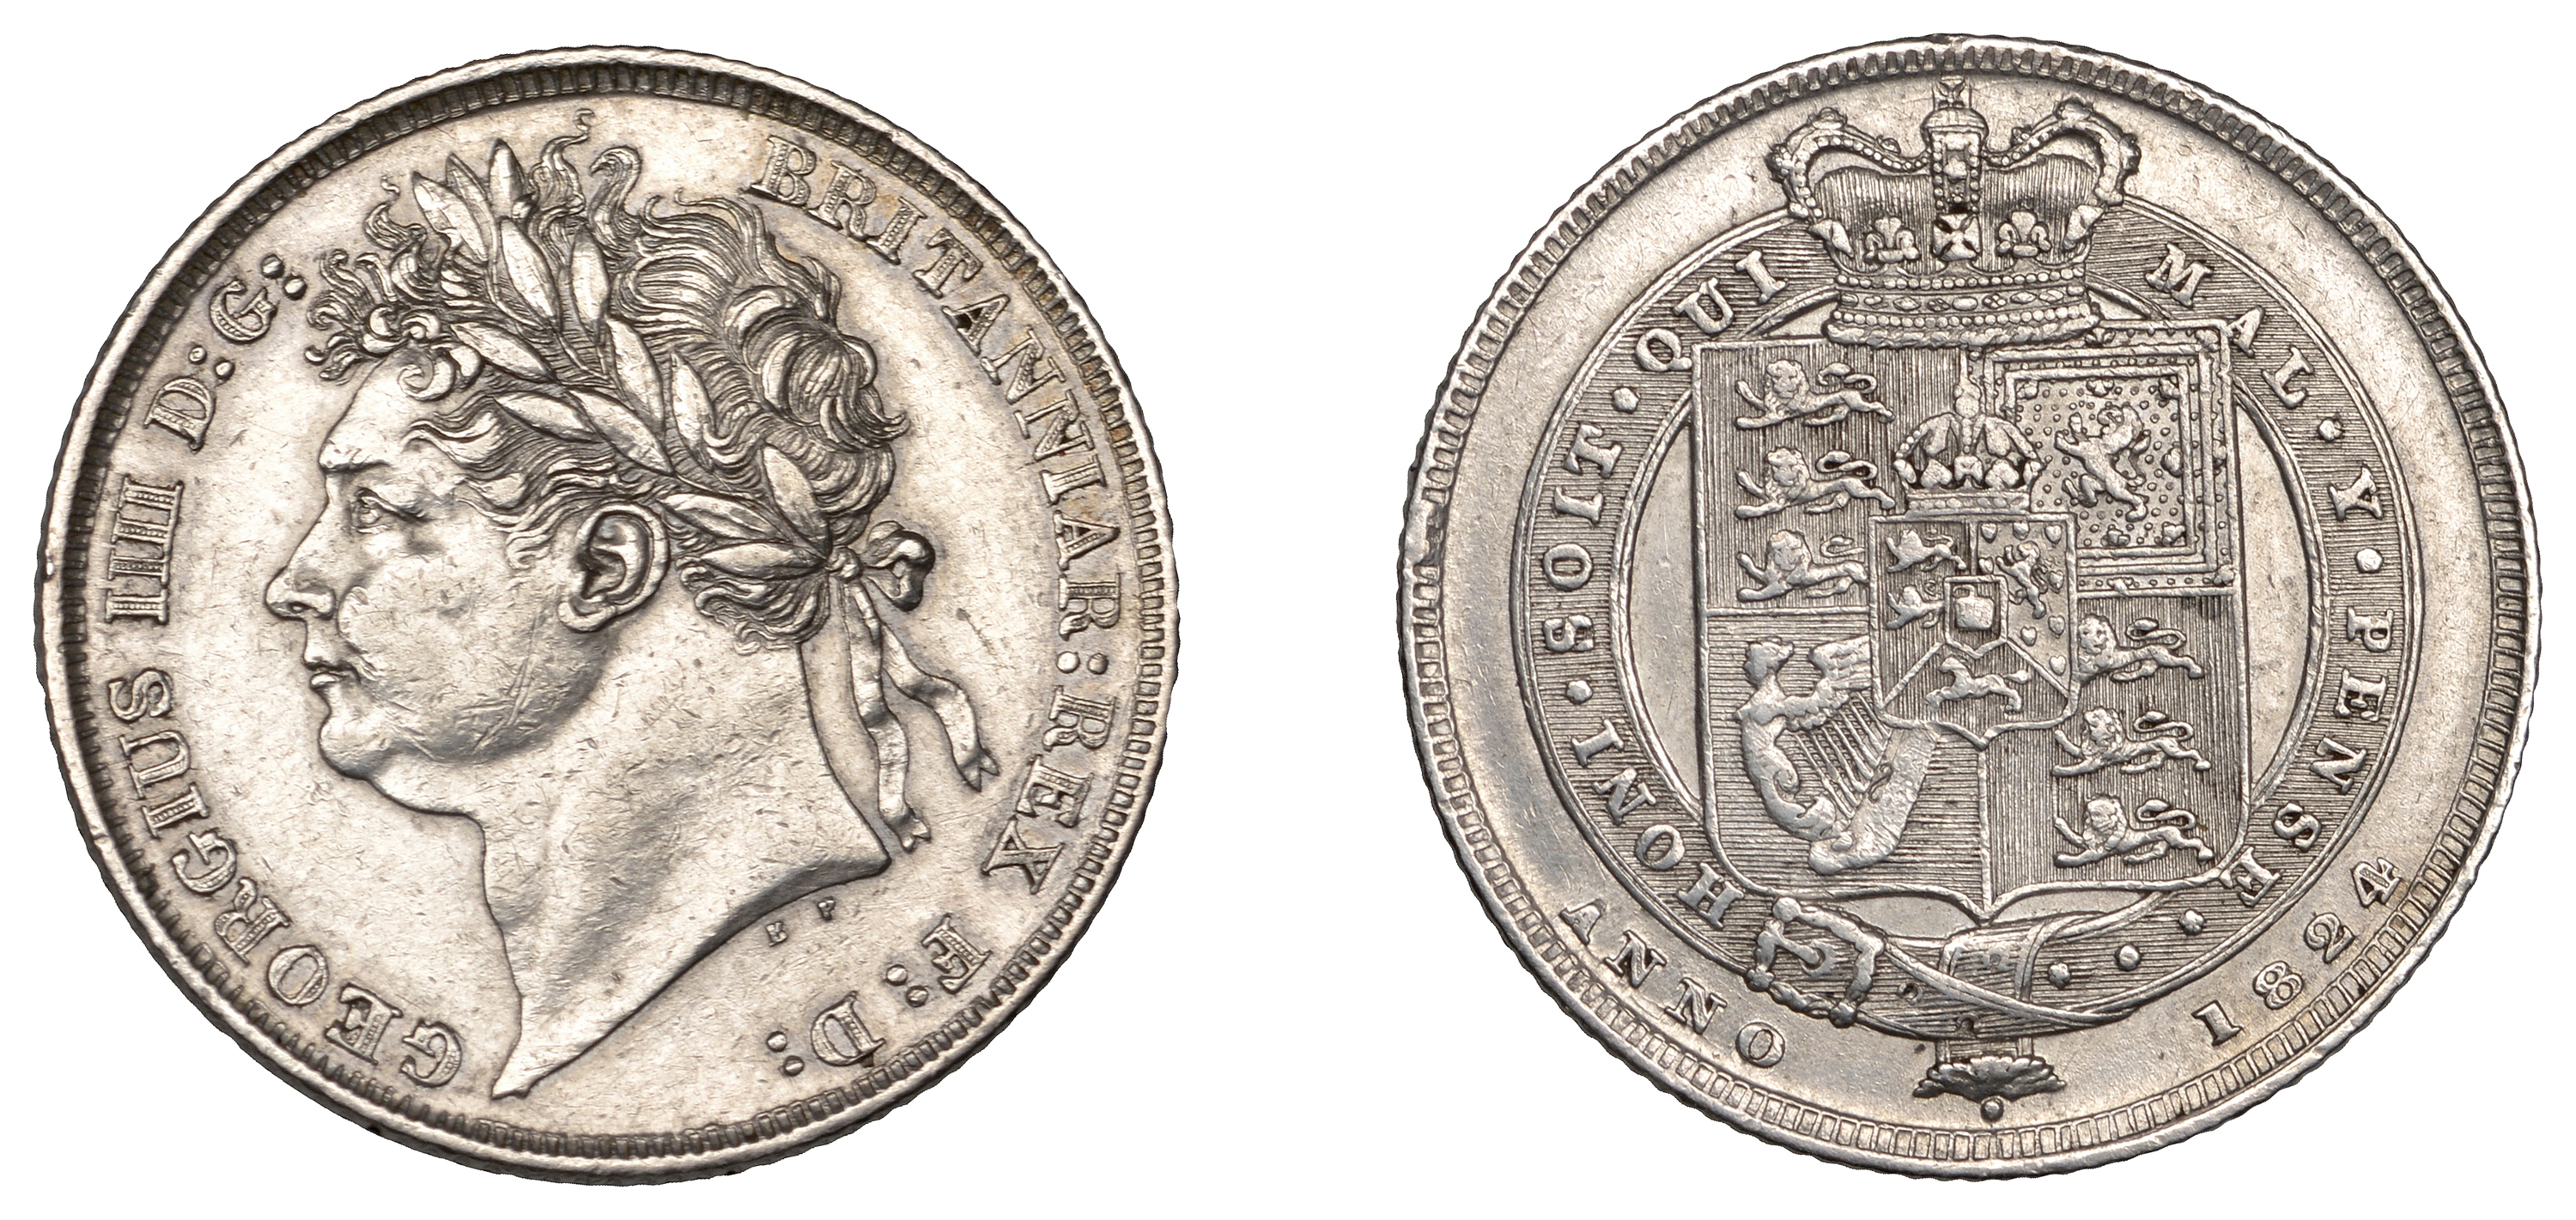 George IV (1820-1830), Shilling, 1824 (ESC 2400; S 3811). Lightly cleaned, good very fine Â£...